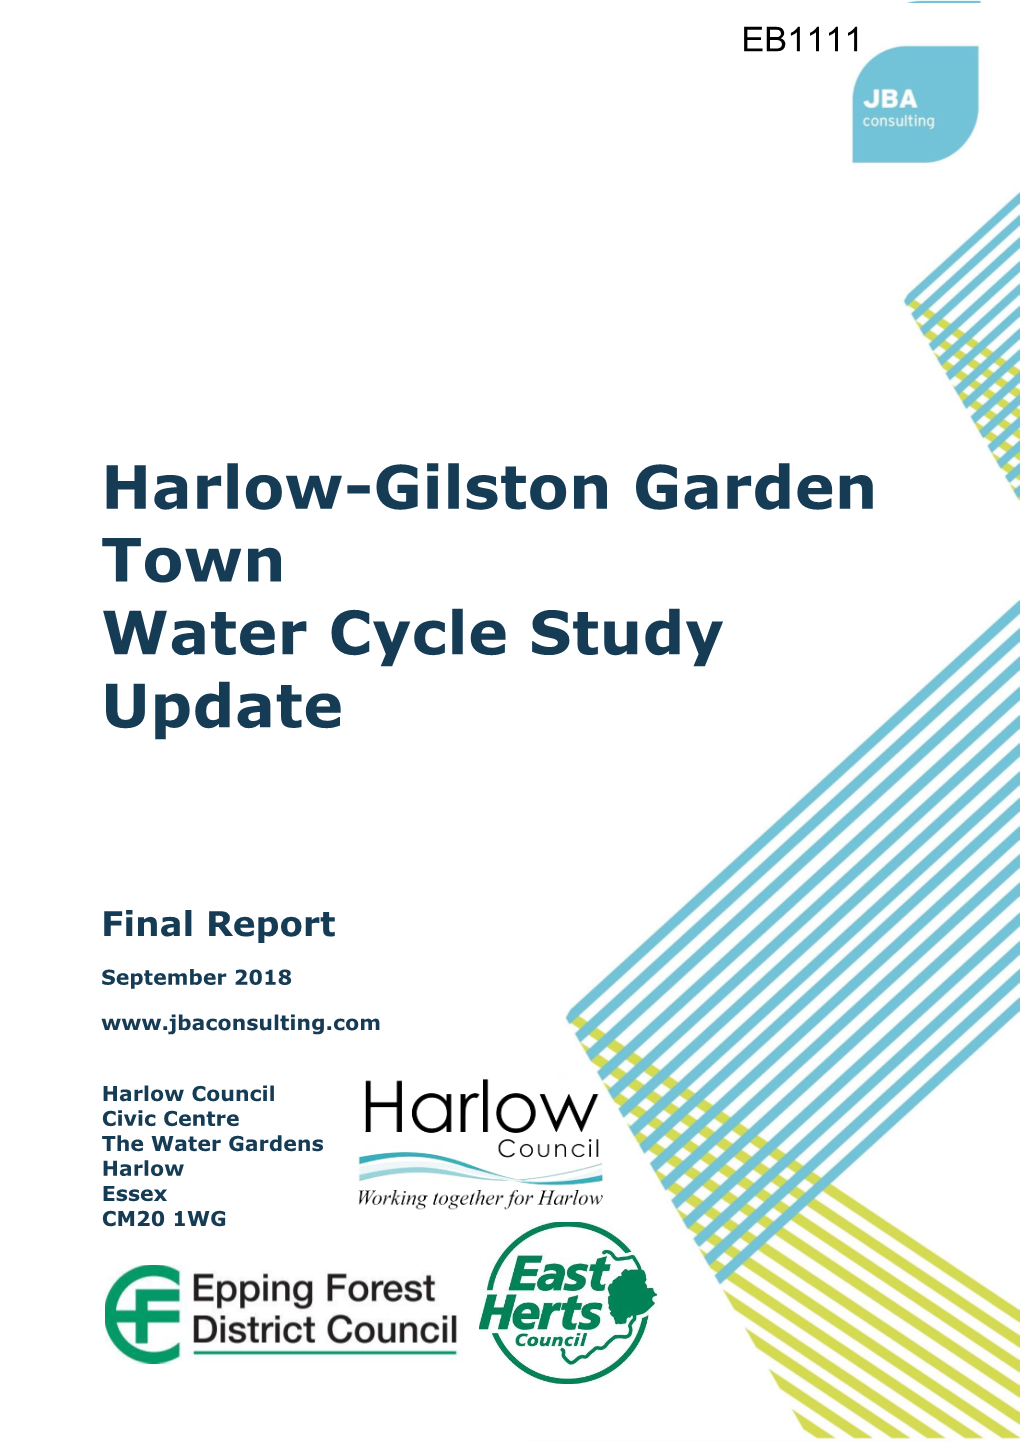 Harlow and Gilston Town Water Cycle Study Update